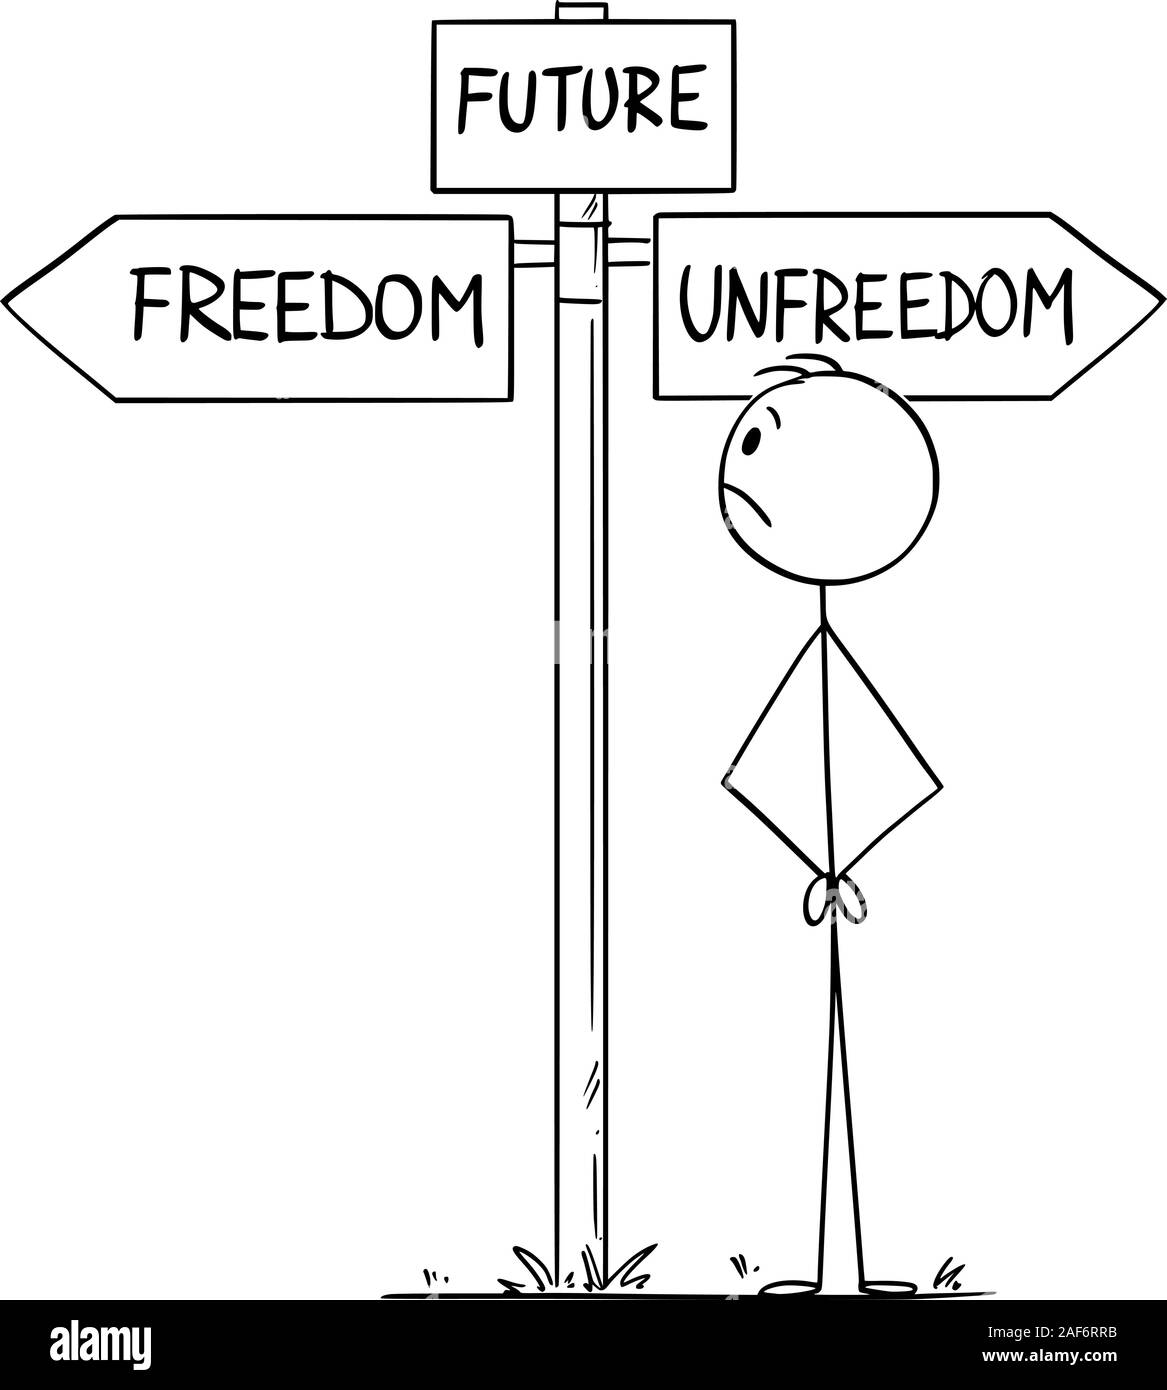 Vector cartoon stick figure drawing conceptual illustration of man standing on crossroad representing human civilization or mankind choosing the future between freedom and unfreedom. Stock Vector